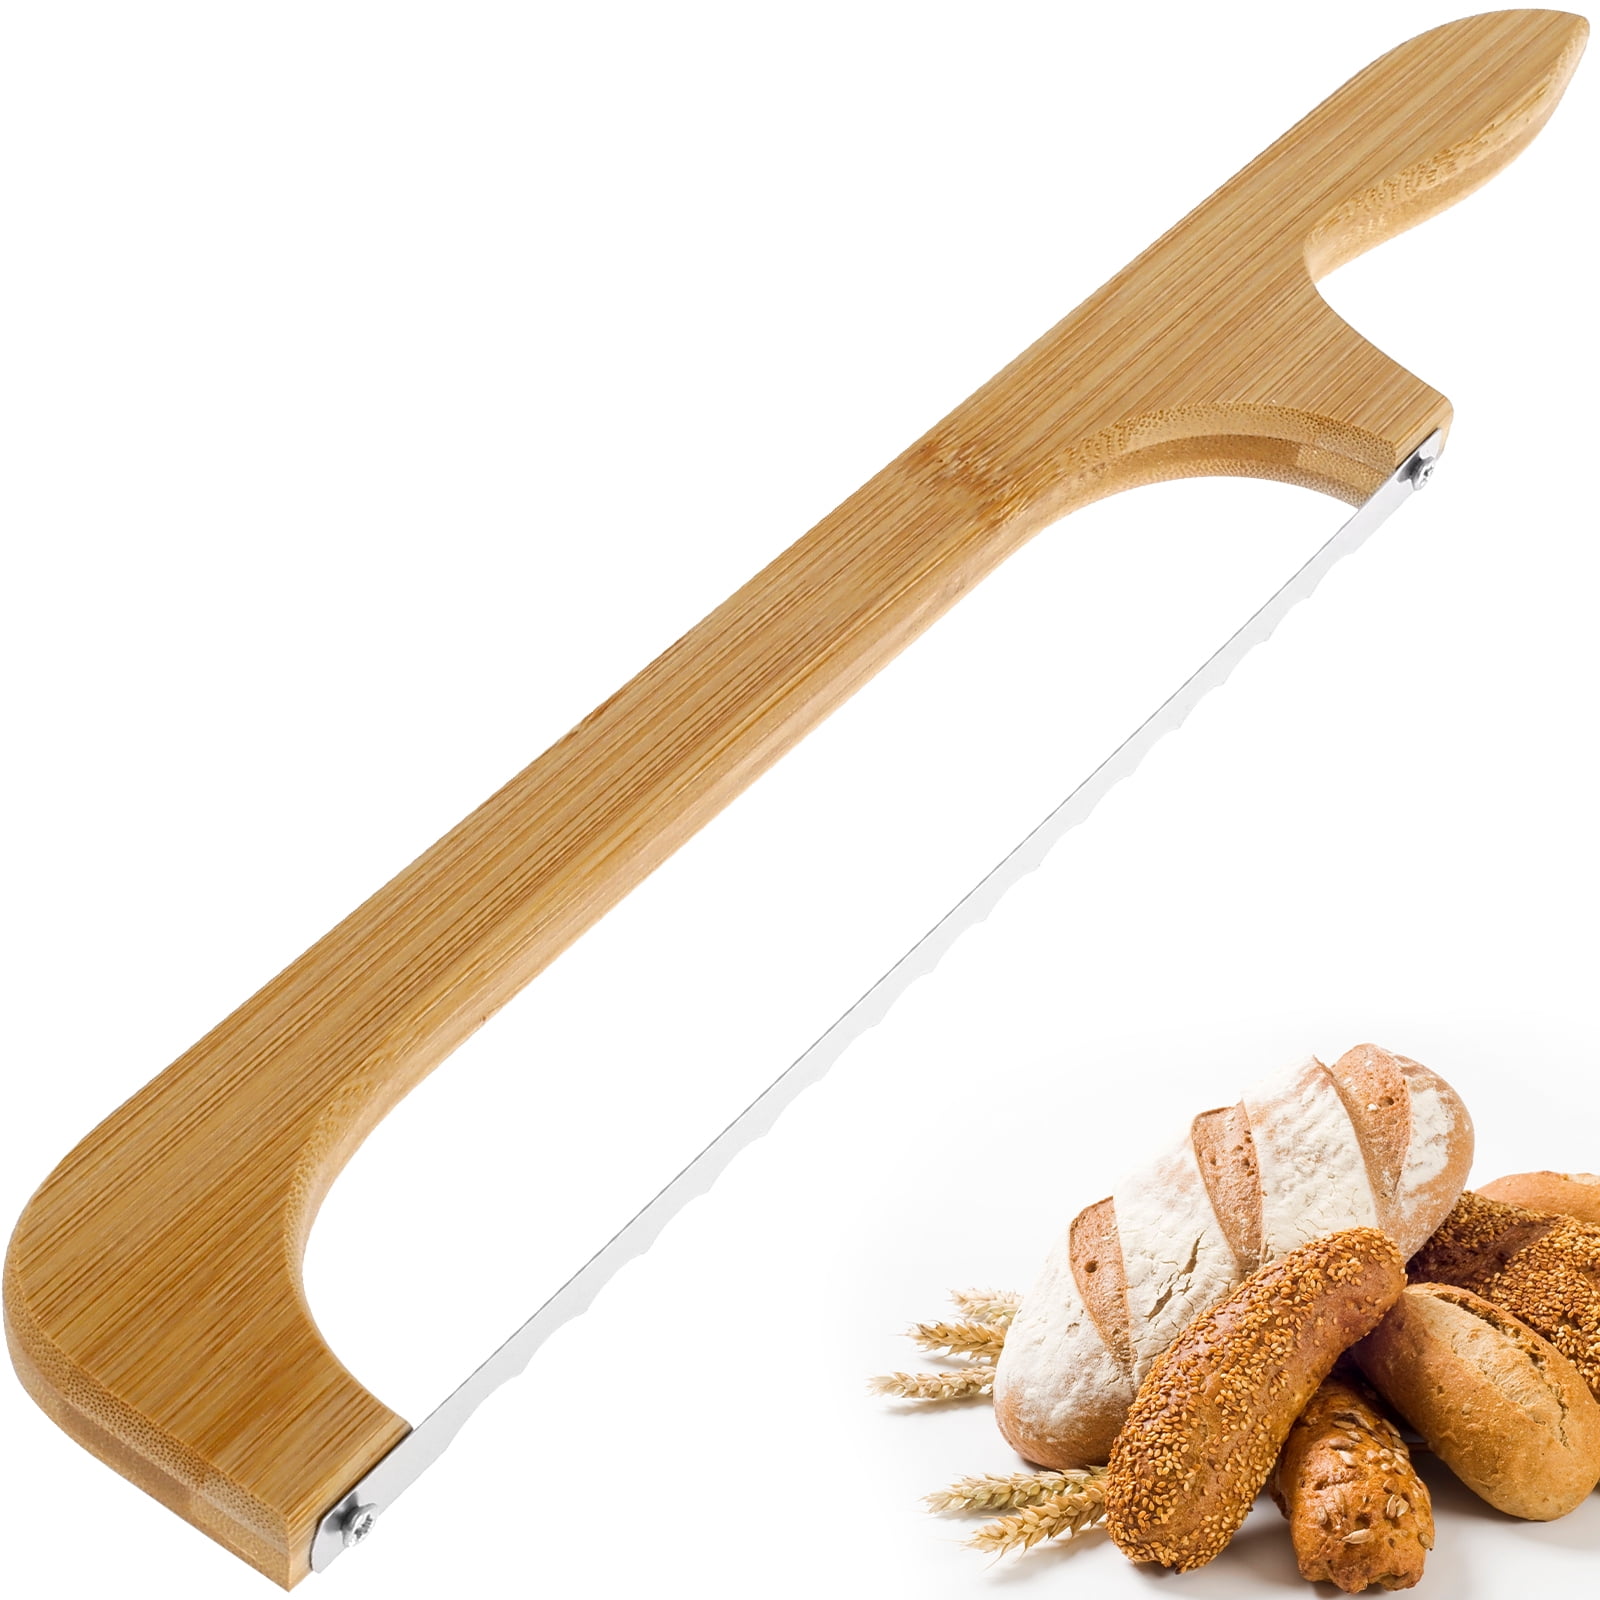  RIJIAKESEN Bread Knife,Bread Slicer, Sourdough Bread Slicer for  Homemade Bread, Natural Wooden Bow Design by Baker and Stainless Steel for  Easy Cutting,Multipurpose Bread Cutter,Serrated Bagel Knife.: Home & Kitchen